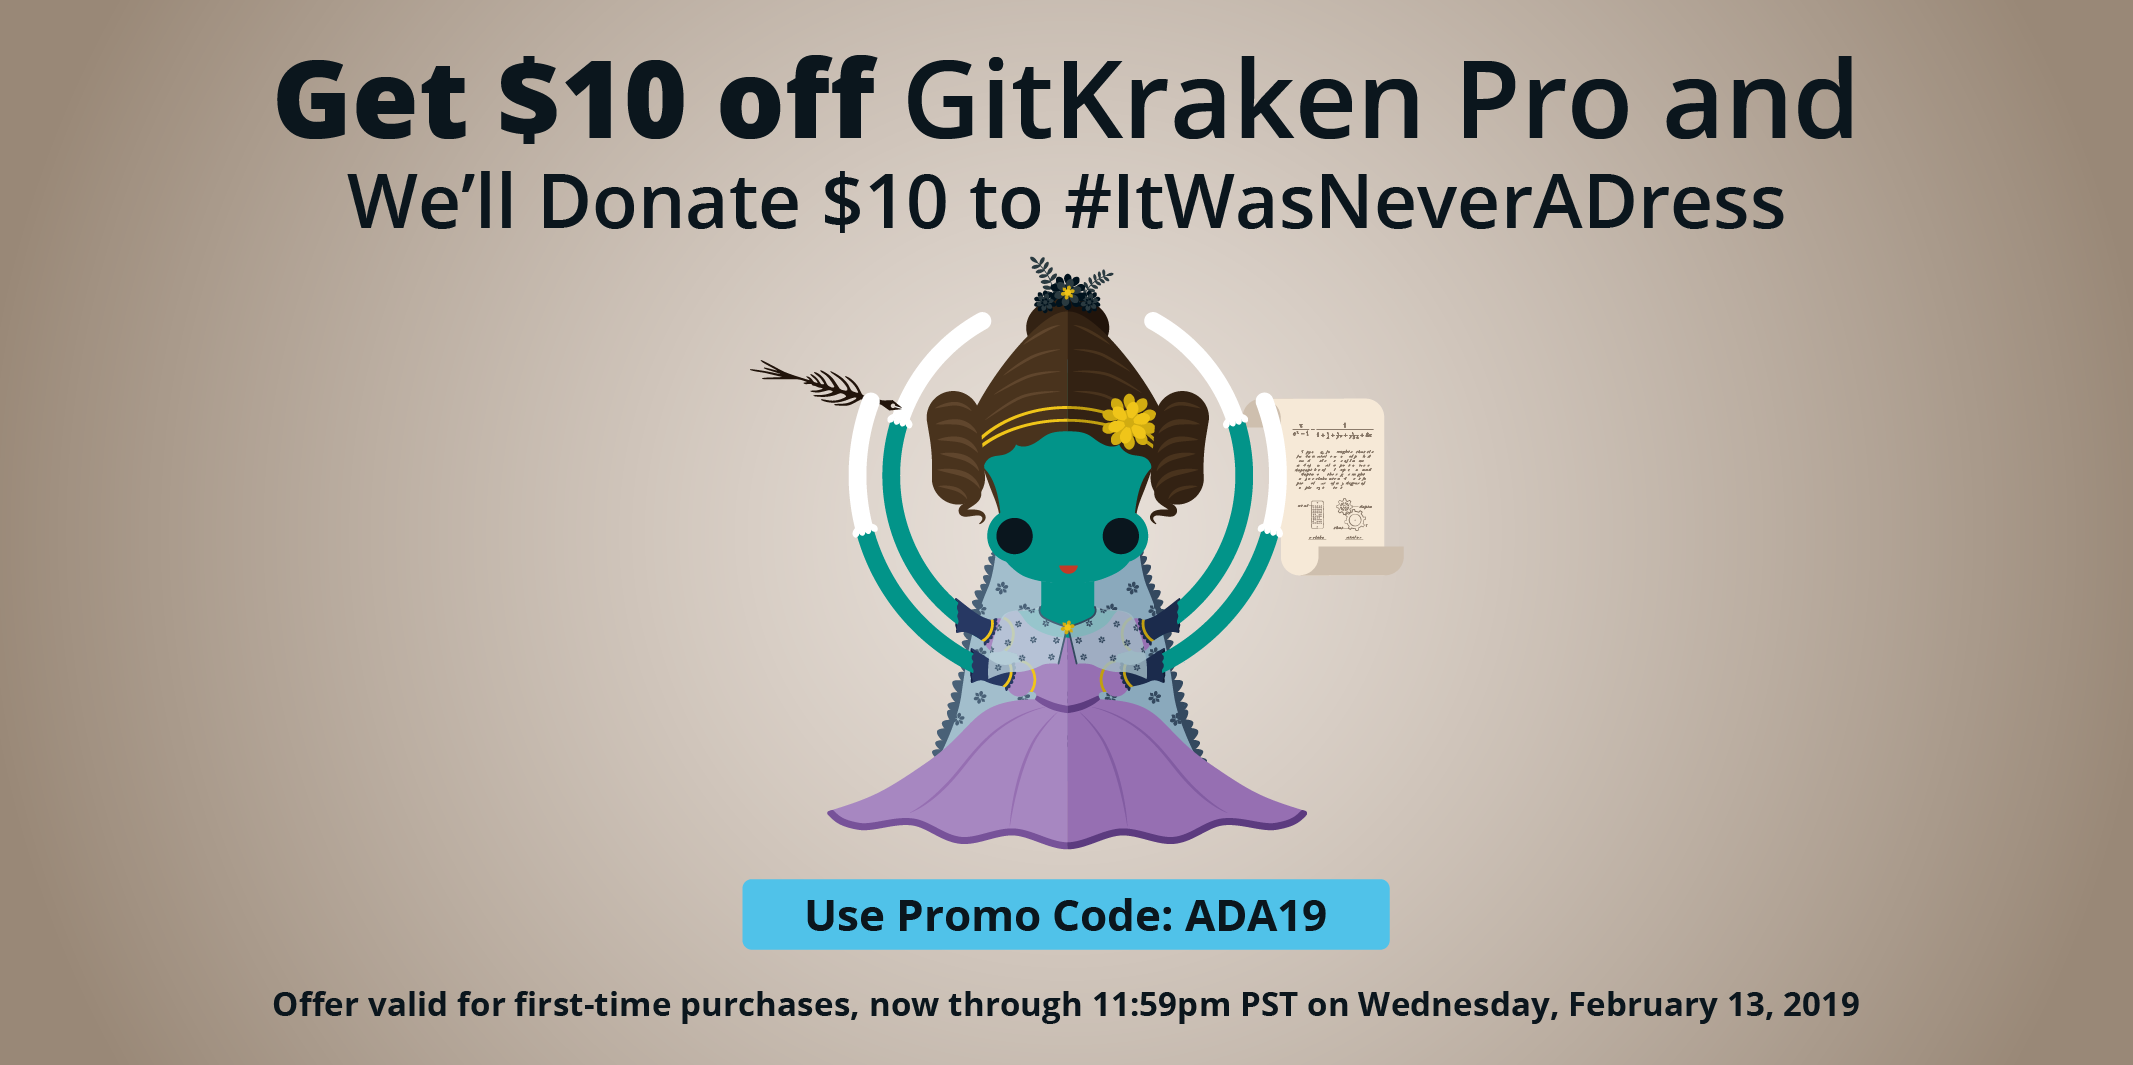 $10 off Pro + $10 donated to #ItWasNeverADress